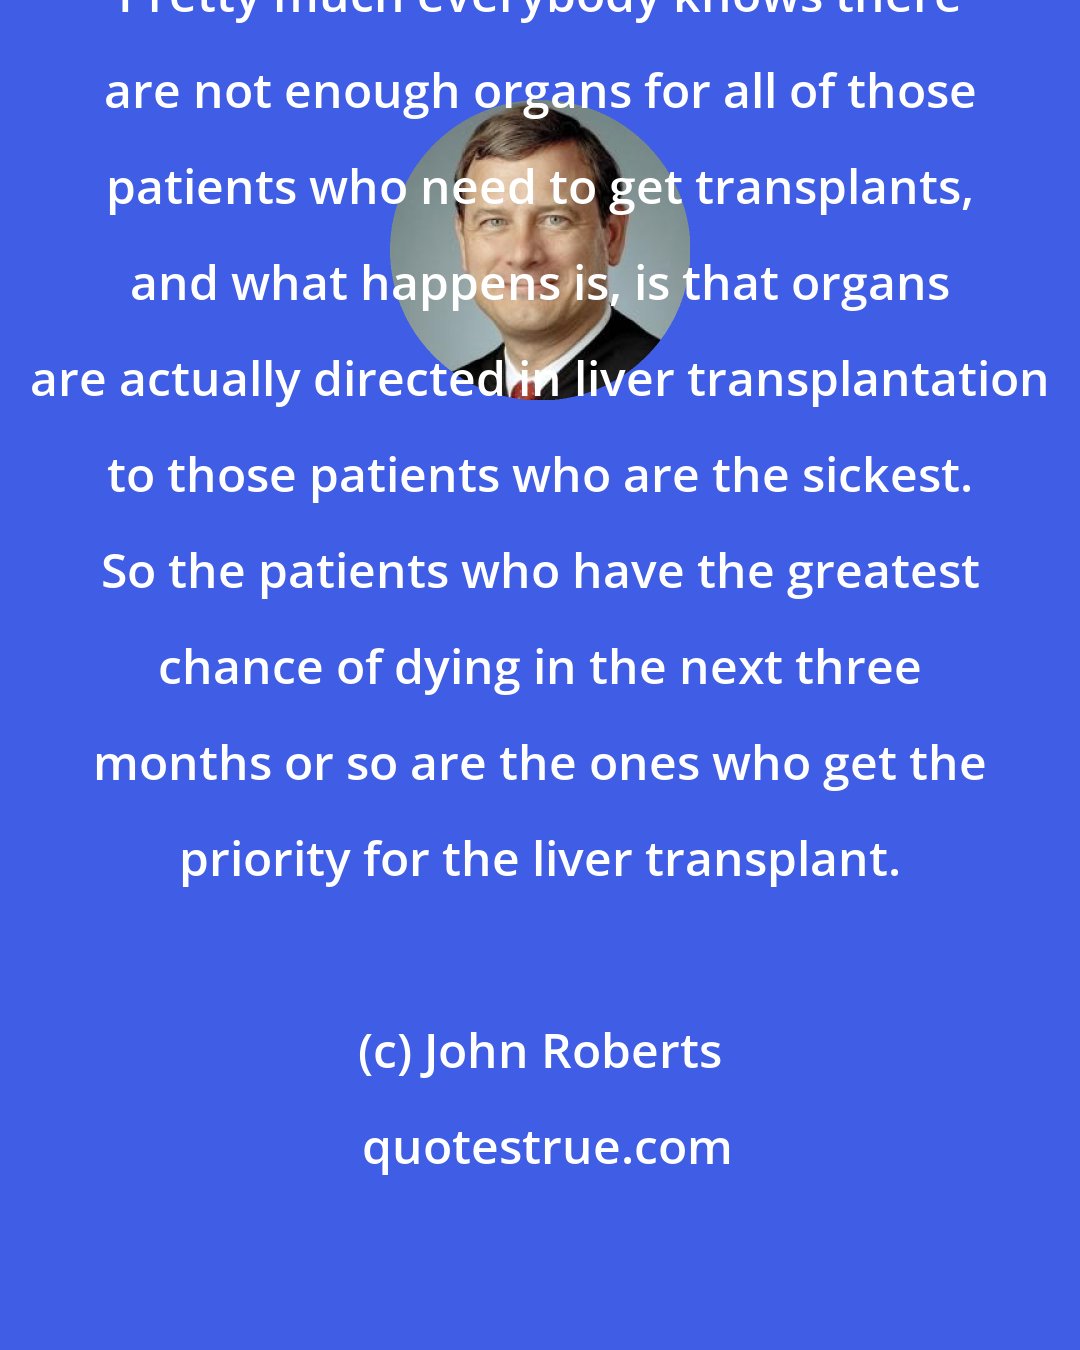 John Roberts: Pretty much everybody knows there are not enough organs for all of those patients who need to get transplants, and what happens is, is that organs are actually directed in liver transplantation to those patients who are the sickest. So the patients who have the greatest chance of dying in the next three months or so are the ones who get the priority for the liver transplant.